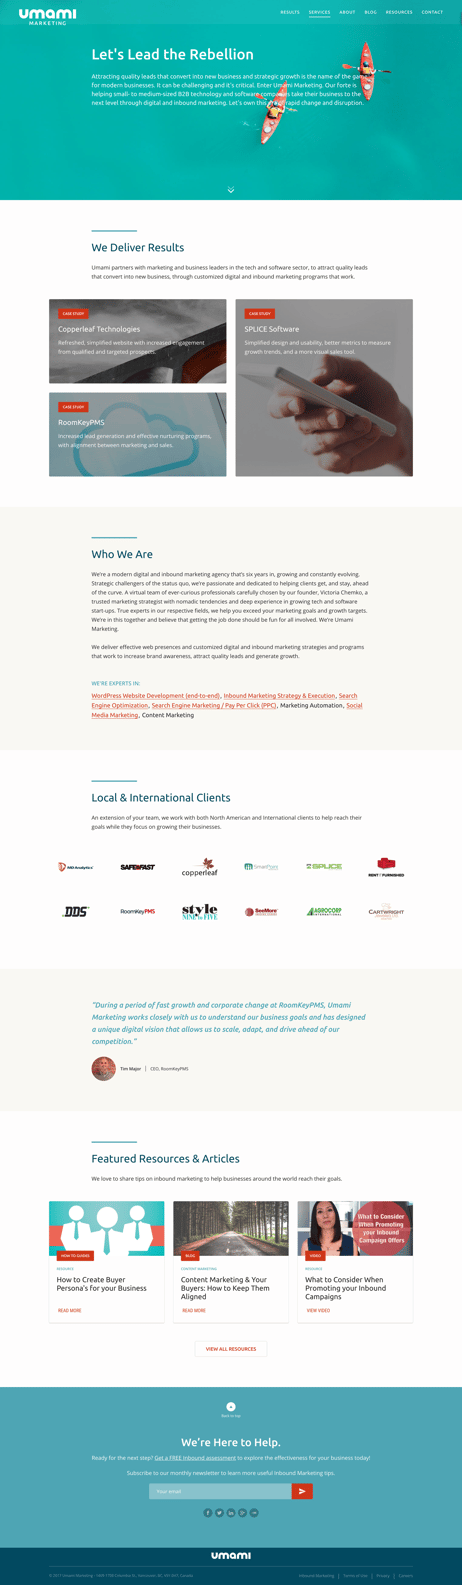 New Umami Homepage Screen Capture.png